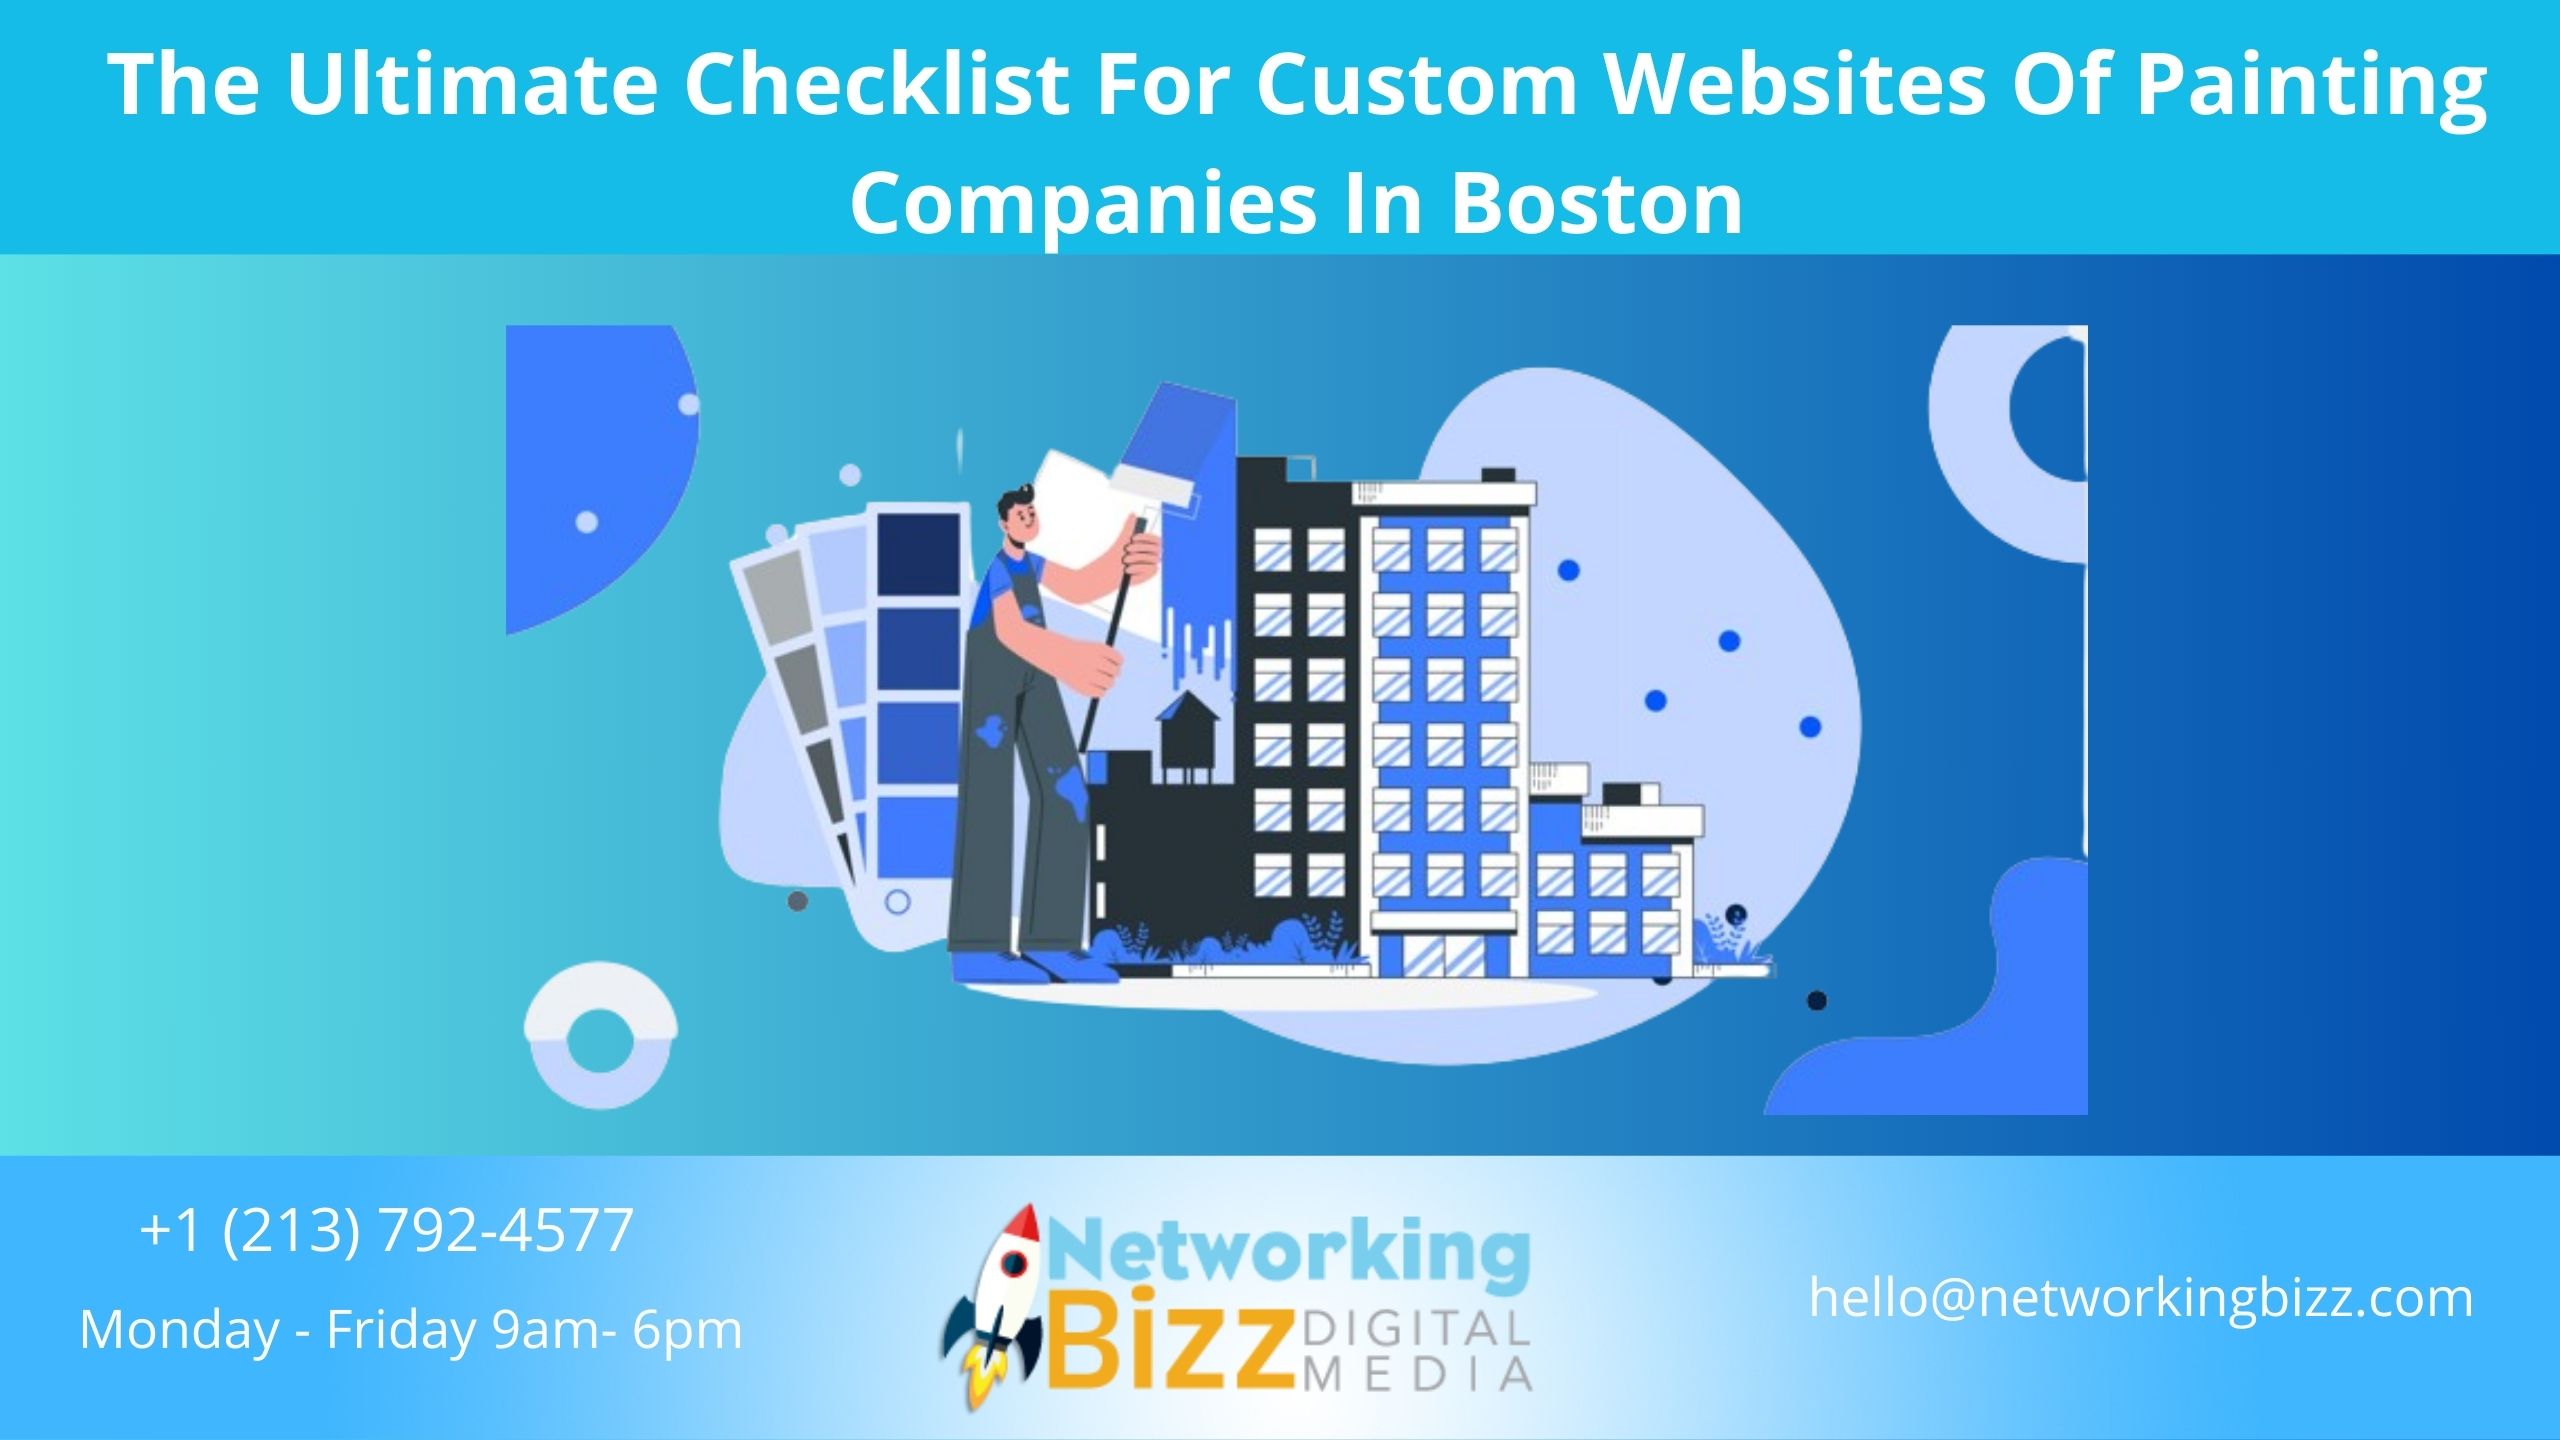 The Ultimate Checklist For Custom Websites Of Painting Companies In Boston